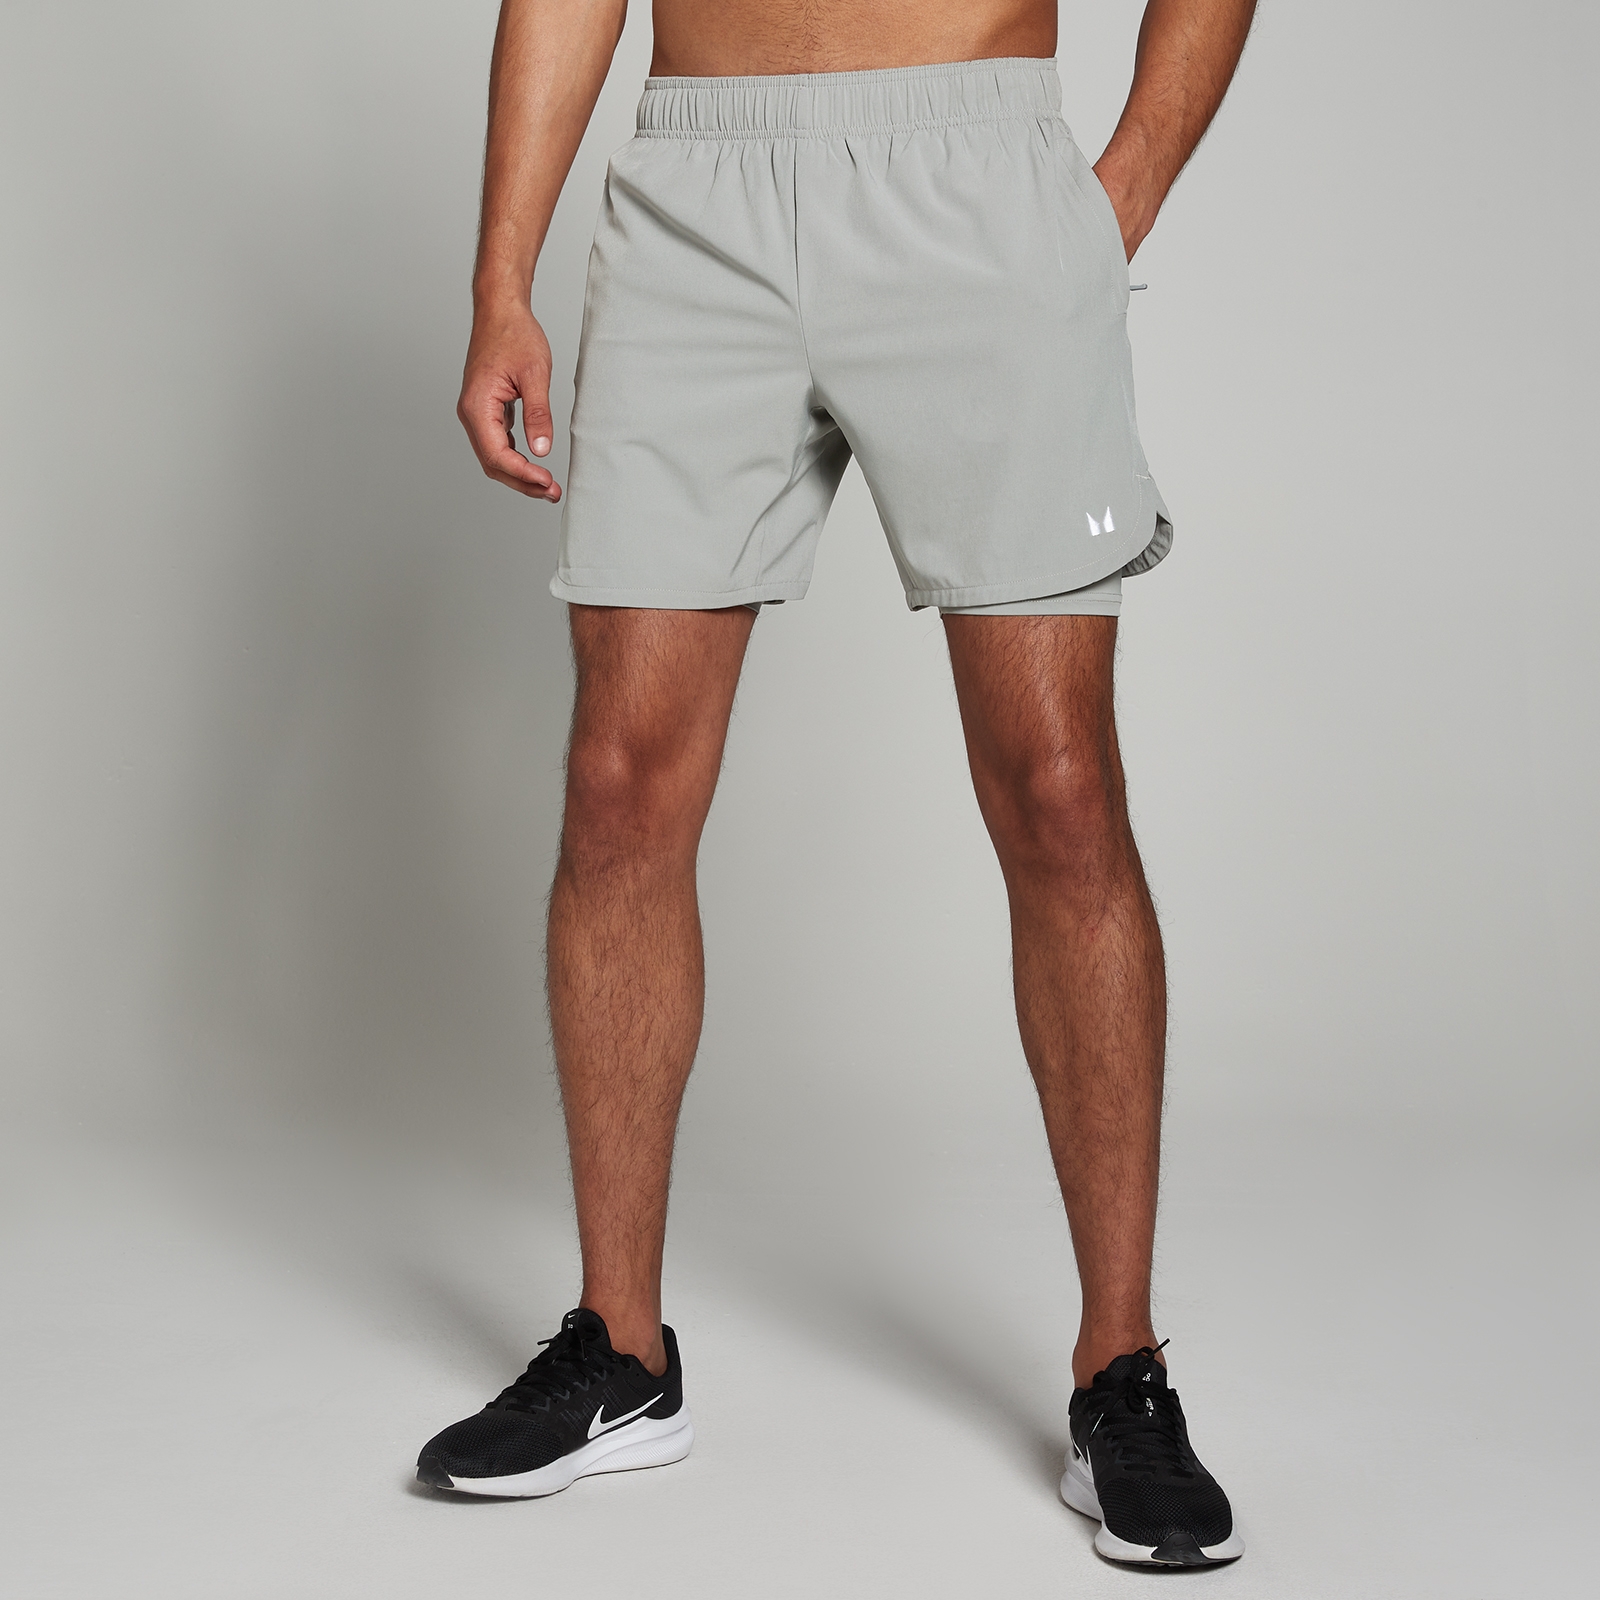 MP Men's 2-in-1 Training Shorts - Storm